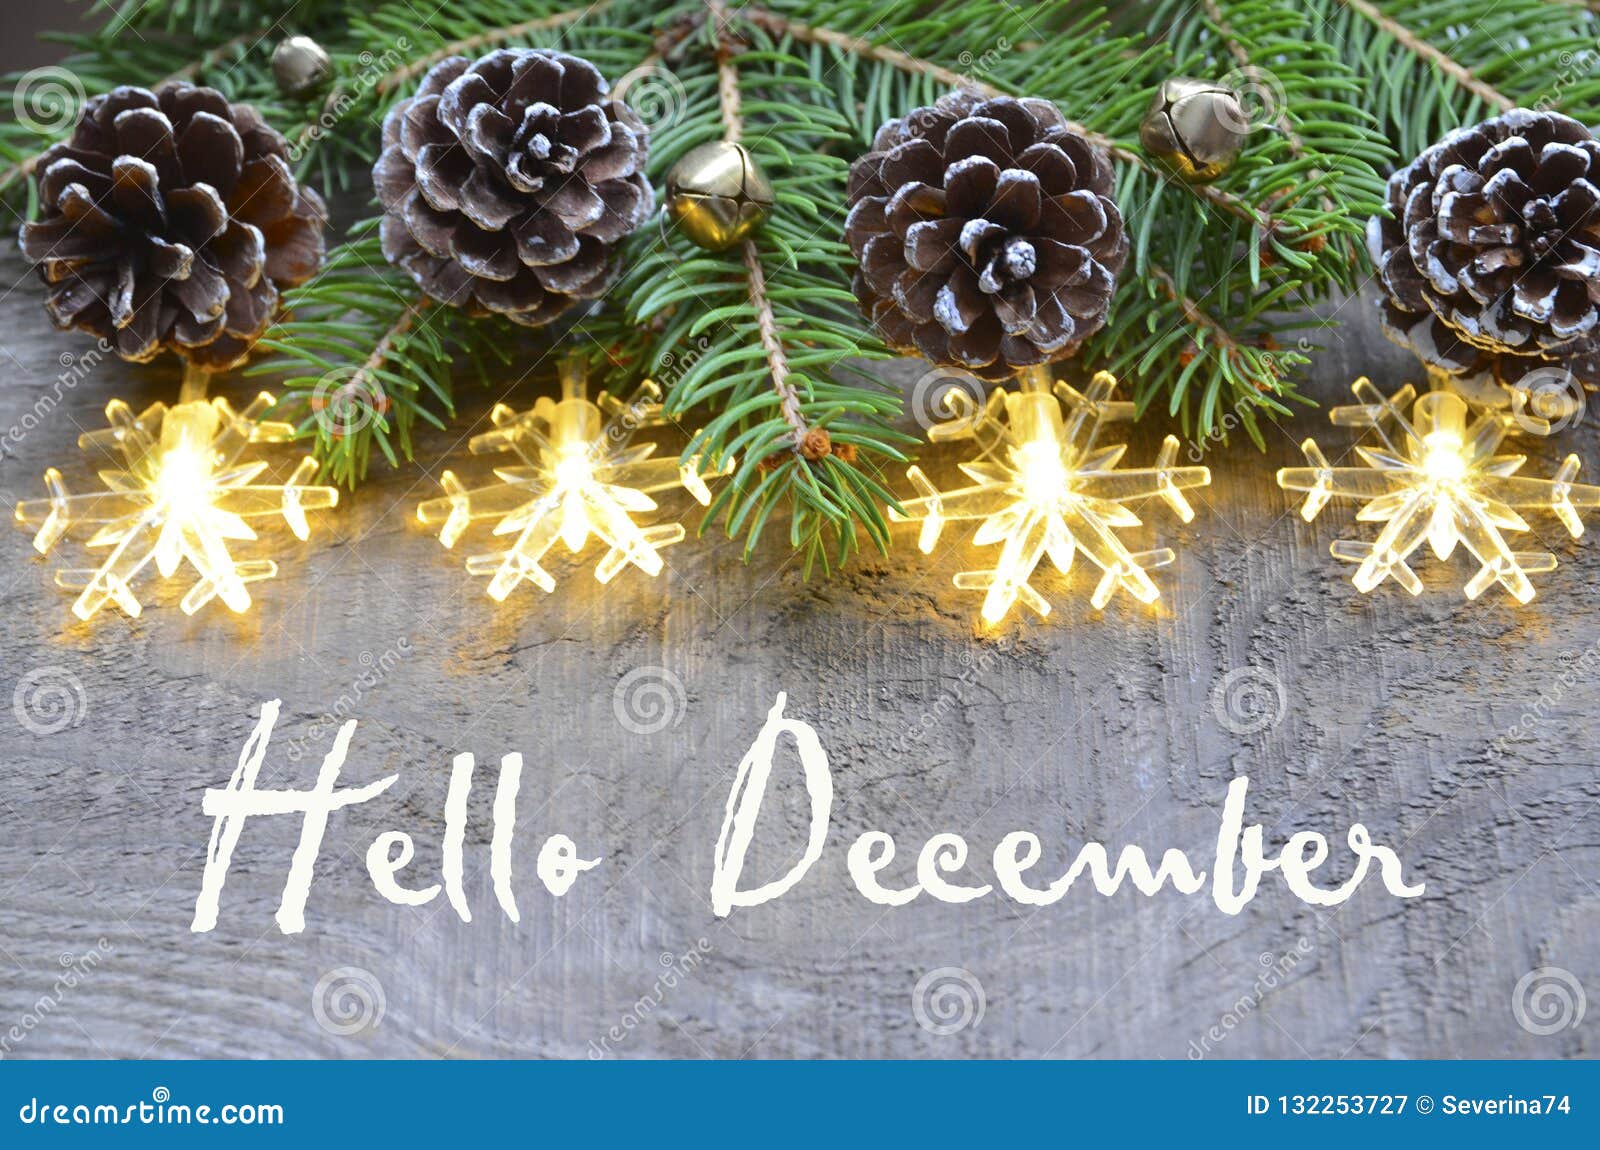 hello december.christmas decoration with fir tree,pine cones and garland lights on old wooden background.